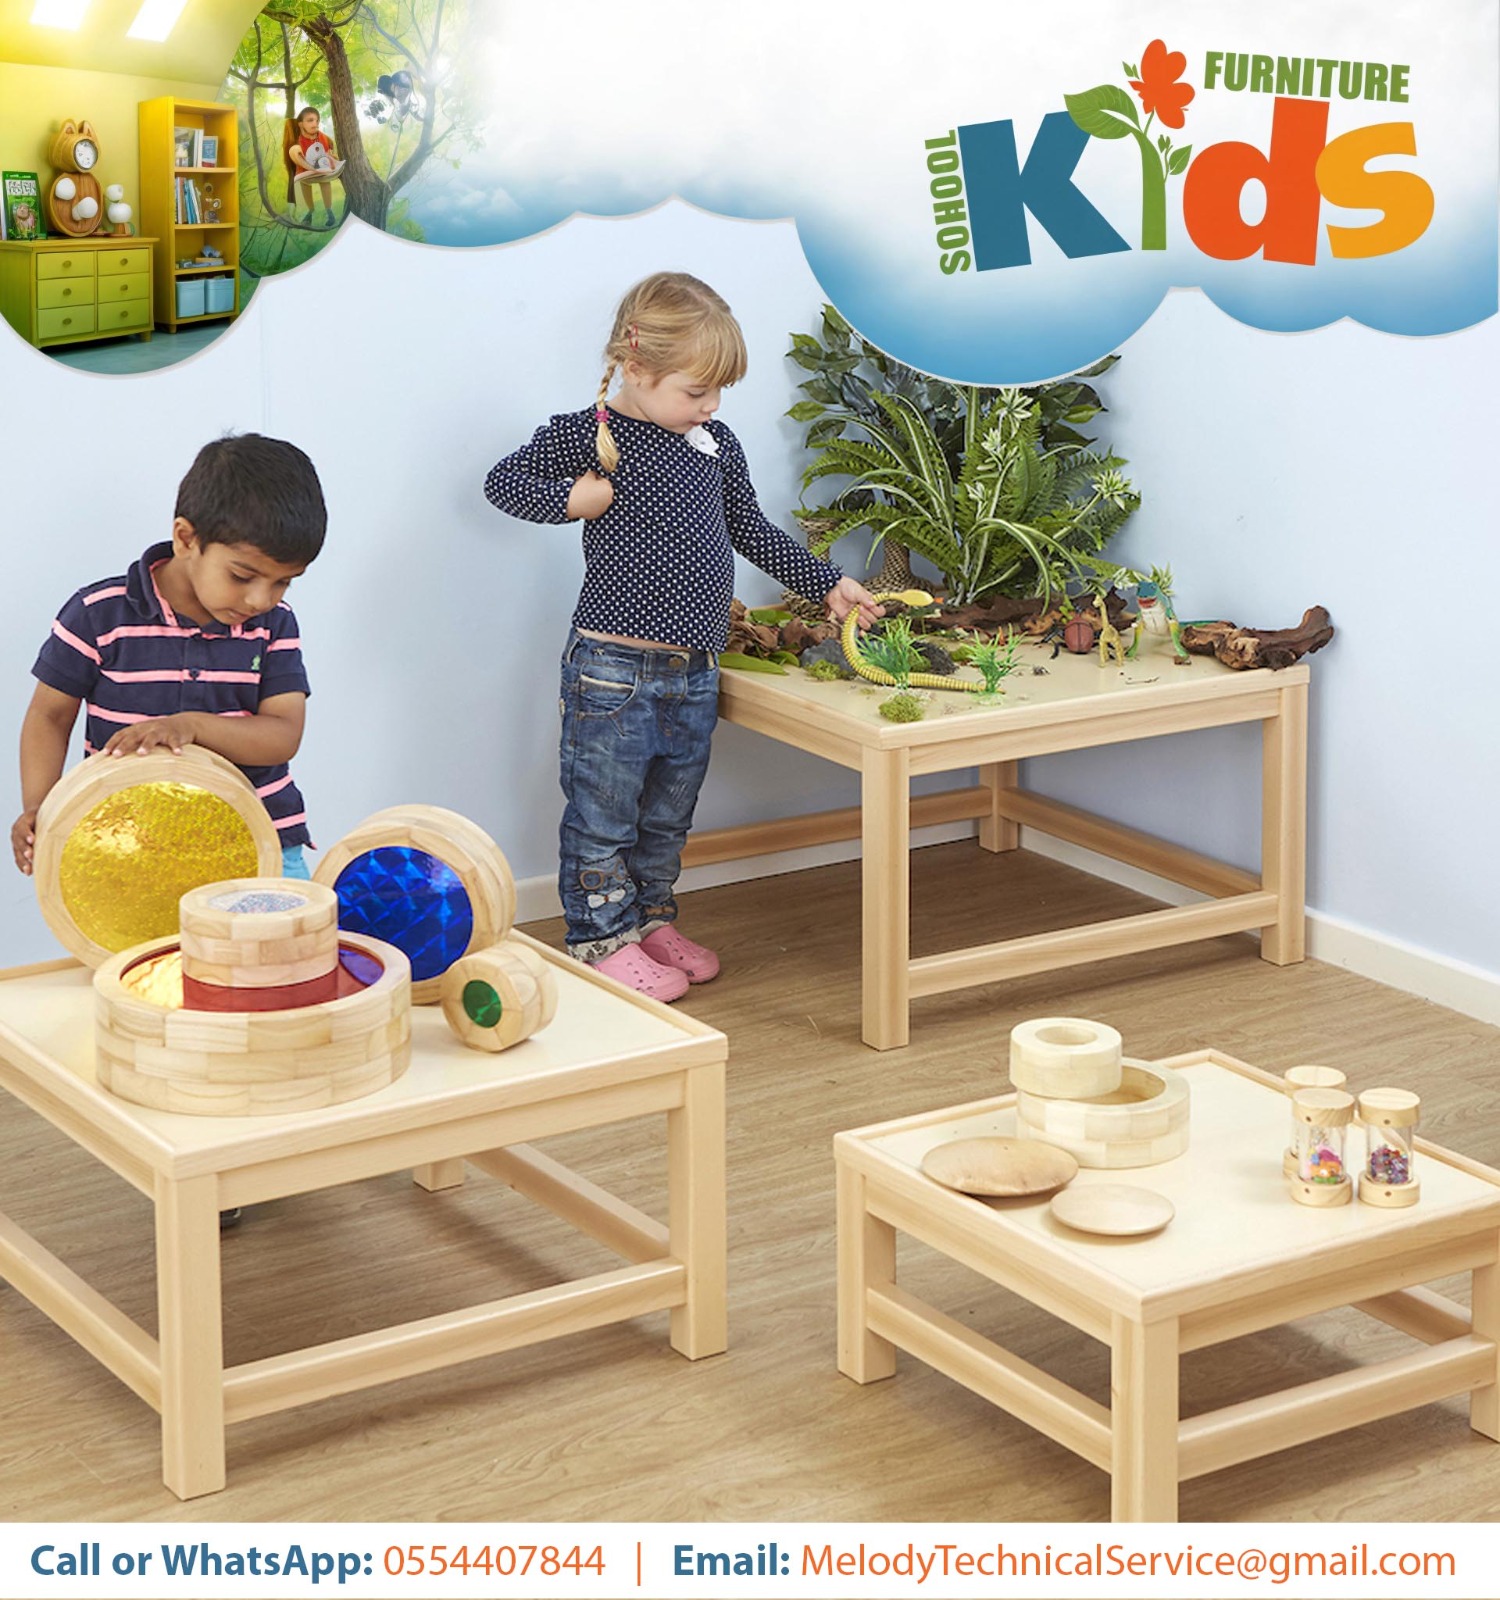 School Furniture Manufacturer And Supply Company In Uae